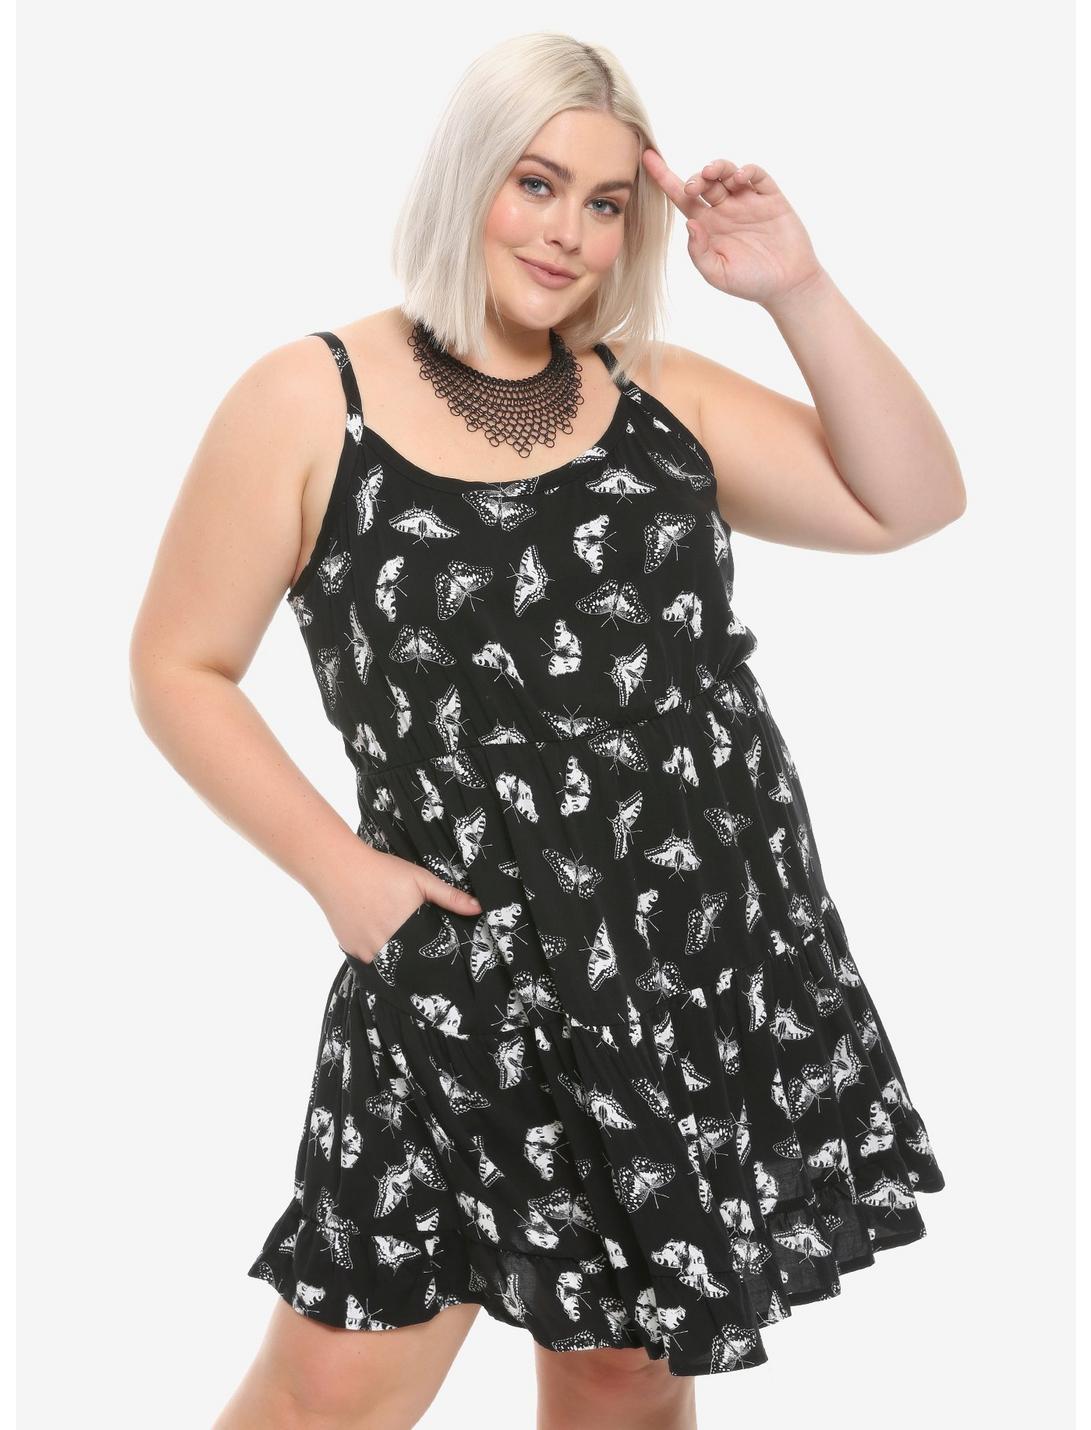 Black & White Butterfly Tiered Dress Plus Size, BLACK, hi-res